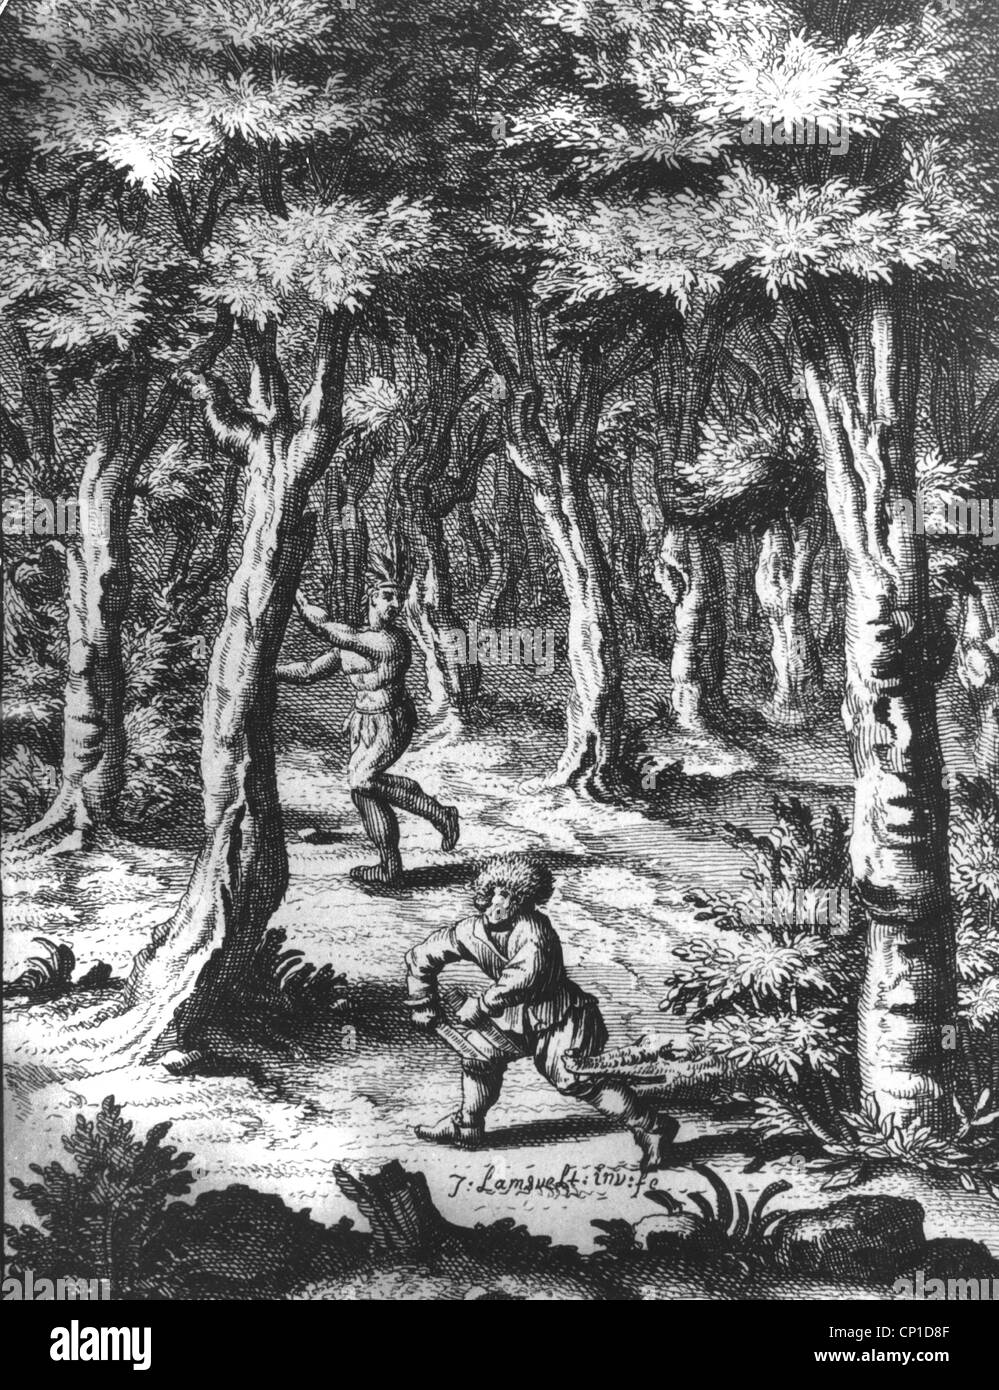 SG hist., navigation, bucaneer/pirate, pirate is being attacked by a crocodile, a native man is fleeing, Florida, contemporary copper engraving, mid 17th century, buccaneer, sabre, sabres, holding knife, flight, attack, biting leg, bite, scream, screaming, forest, forests, wood, woods, historic, historical, people, Additional-Rights-Clearences-Not Available Stock Photo